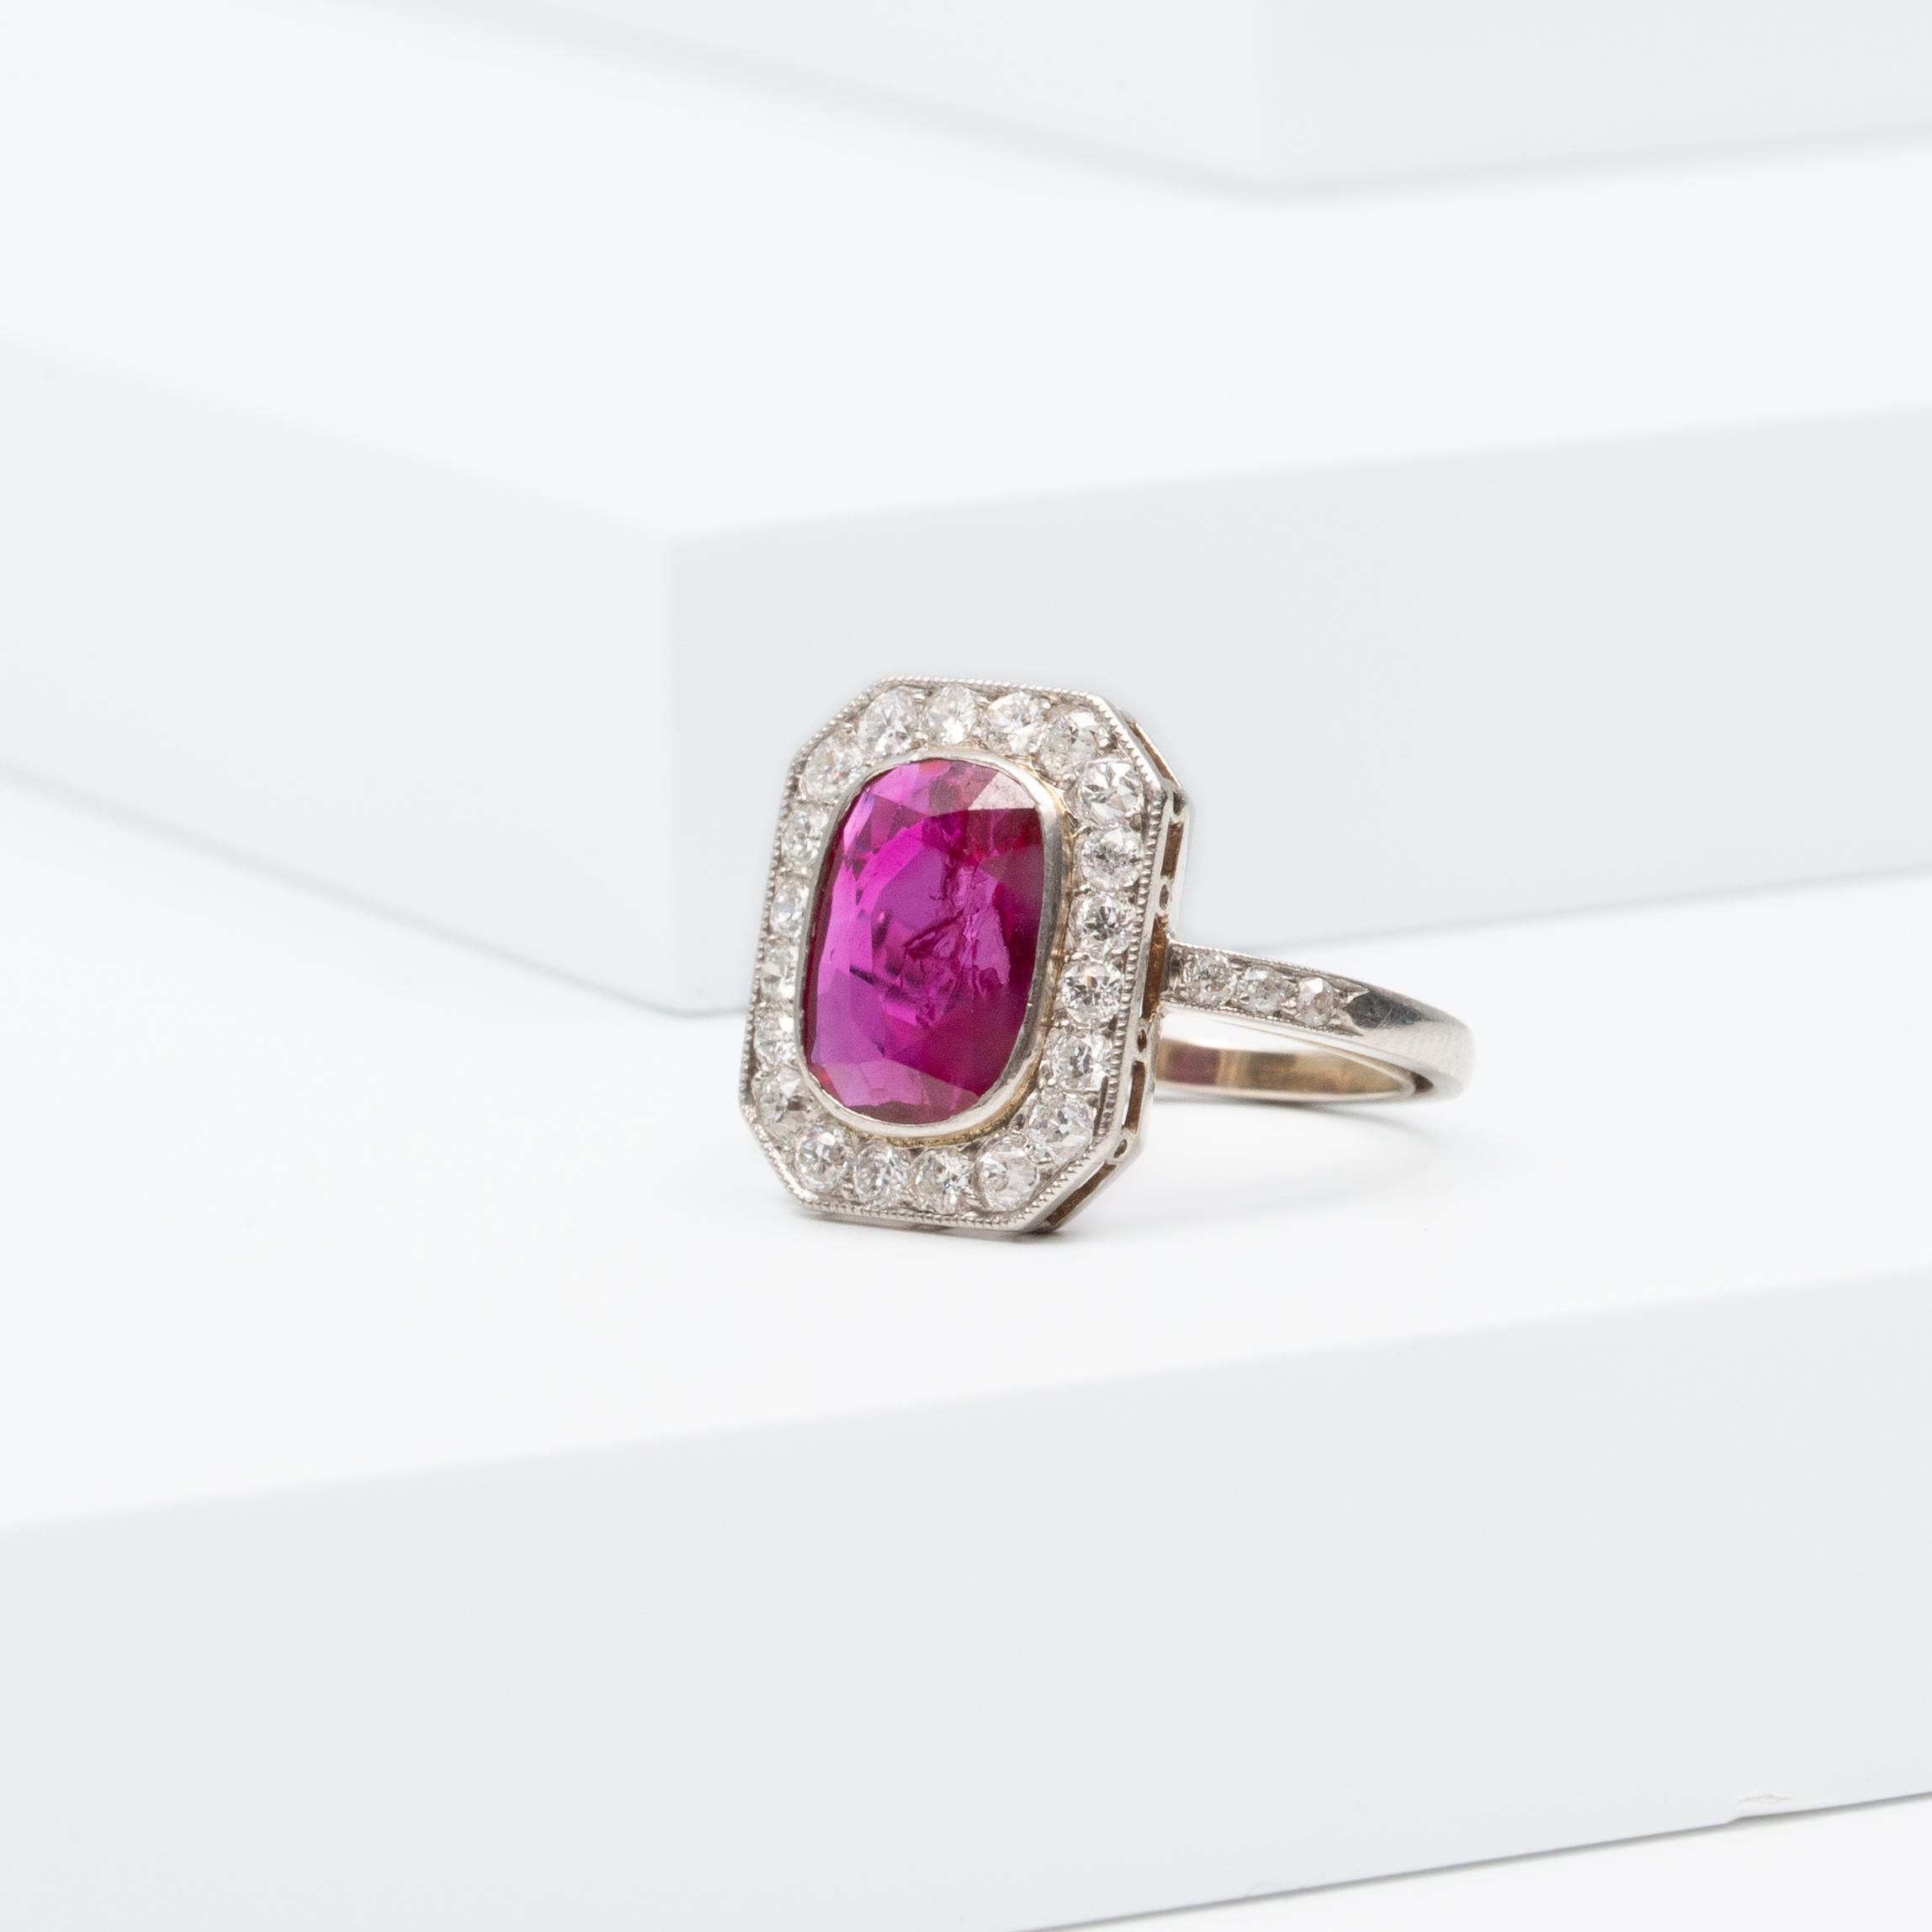 A Belle Époque untreated natural Burmese ruby and diamond cluster ring, set in platinum. French, circa 1915.´
Ring contains one cushion-cut purplish-red natural ruby, with no treatment and no indication of heat, of Burmese origin with a total carat